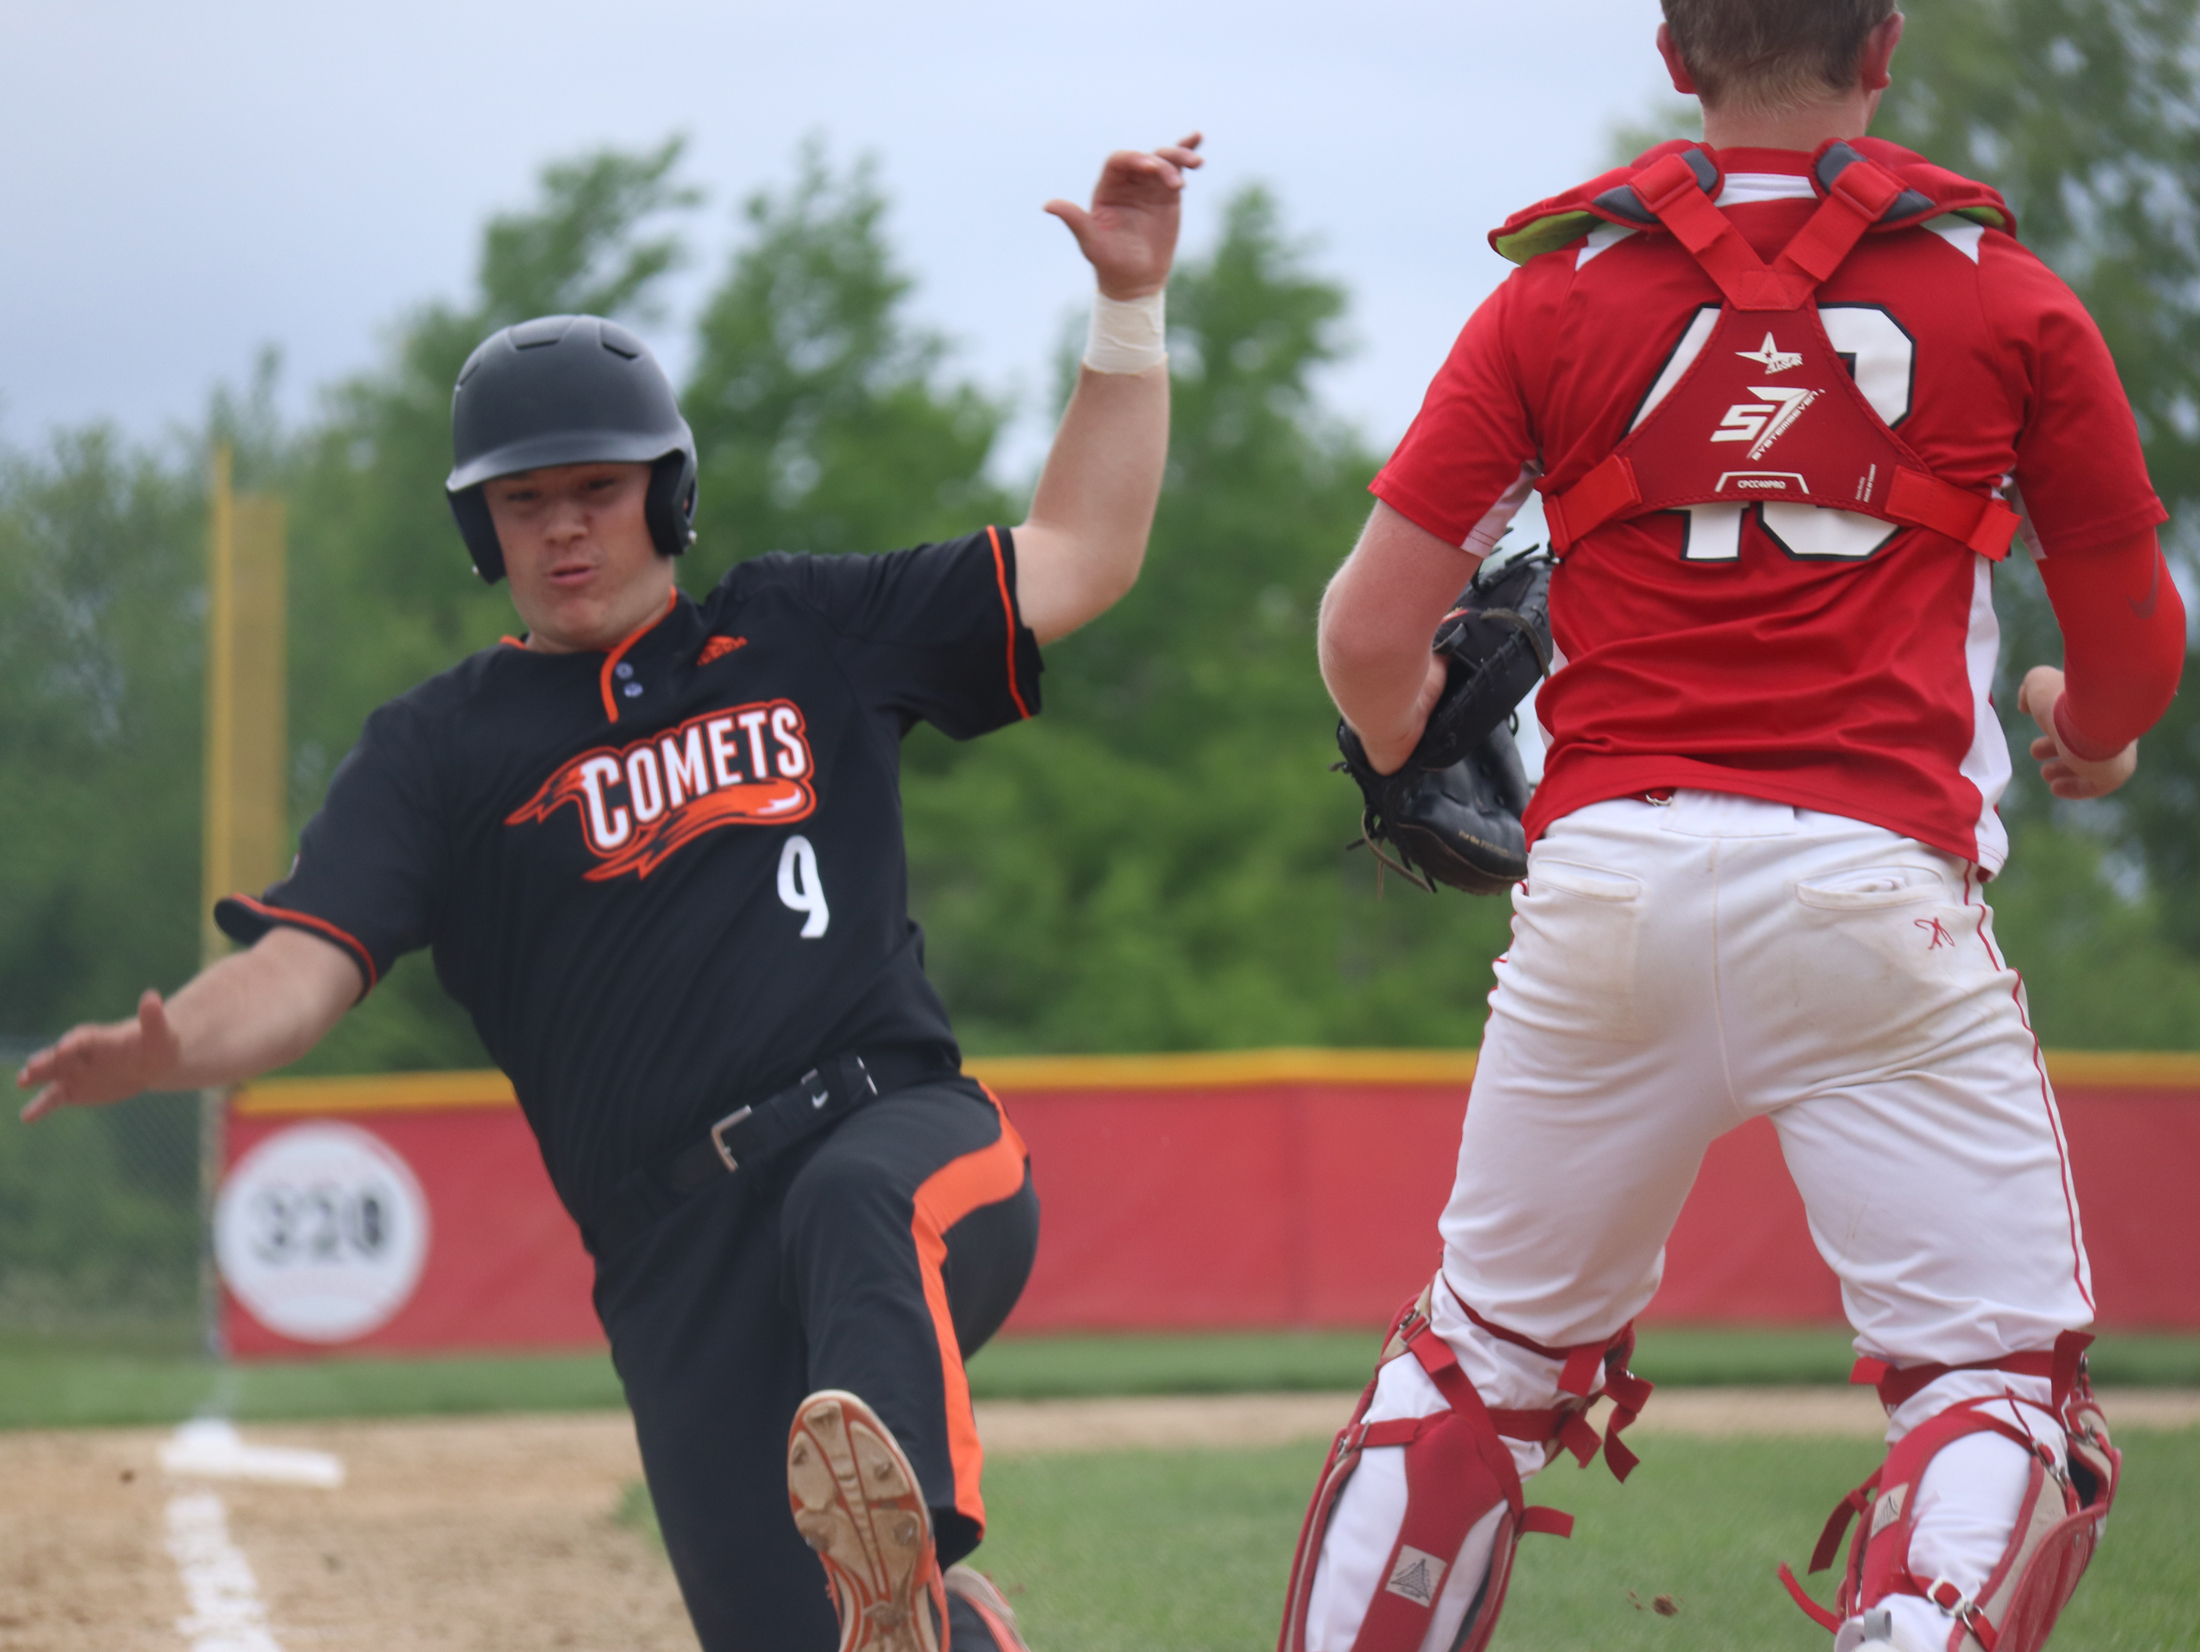 Comets win 12-3 playing Turkey Valley ‘house rules’